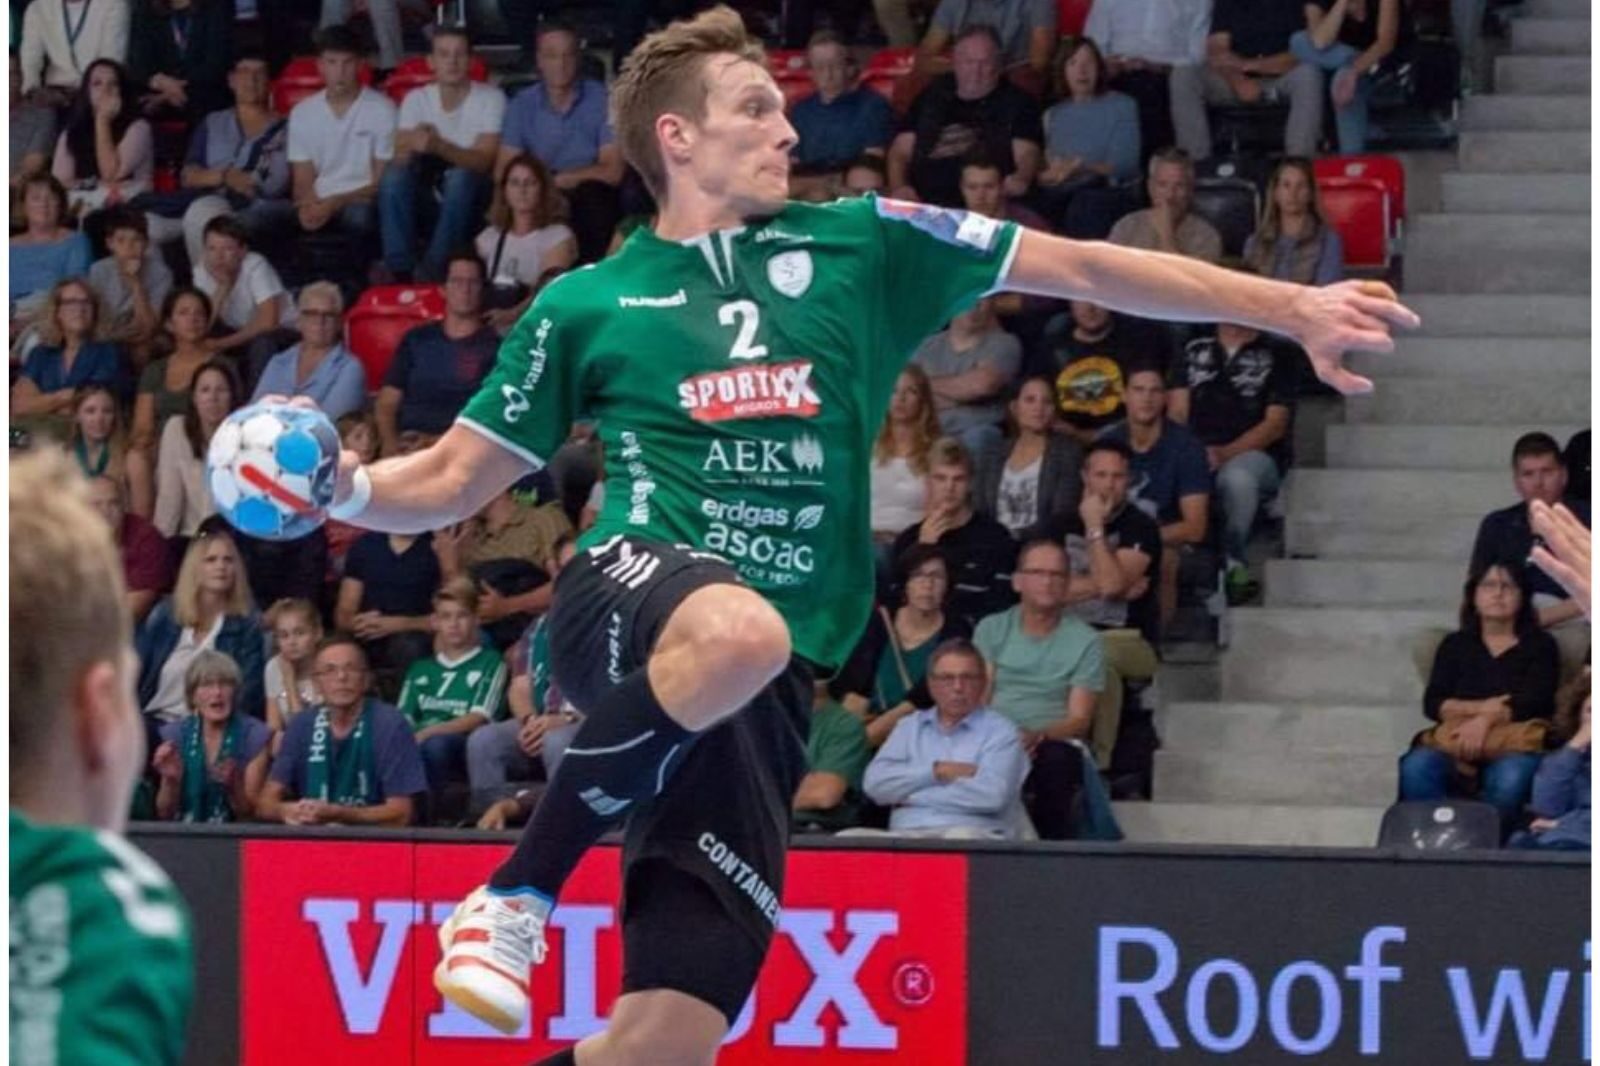 Phillip Tandrup Holm is the Strength and Conditioning Coach for Skjern Håndbold, a Danish handball club he used to play for.